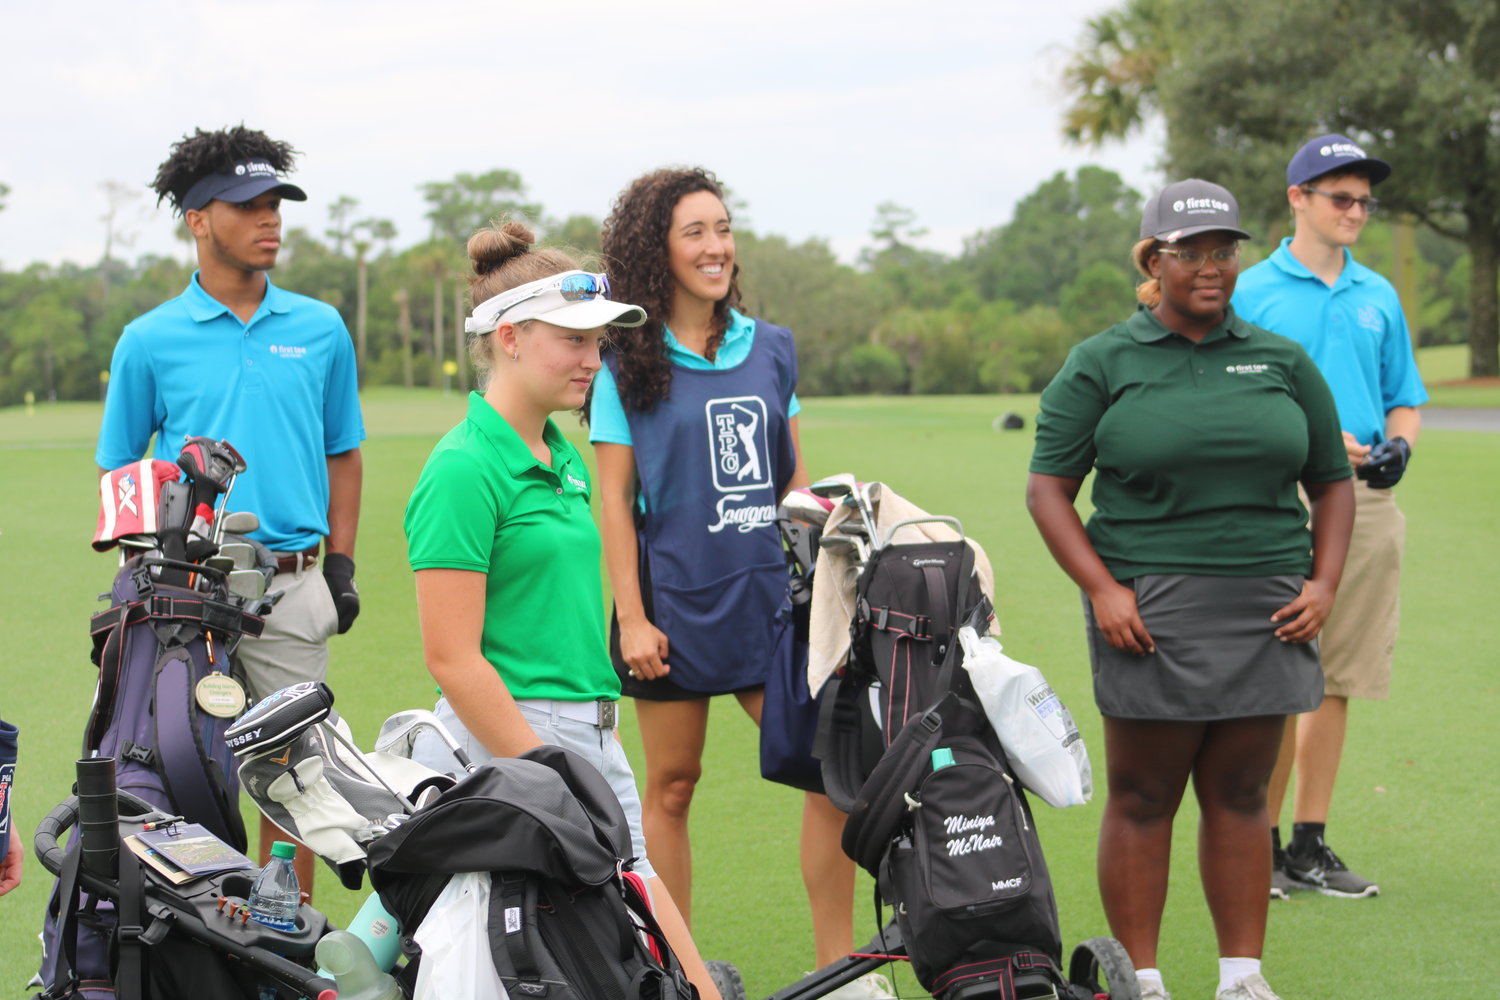 First Tee of North Florida members Tyson Brown, Katarina Hoag, Miniya McNair and Matthew Olsen await the start of a round at THE PLAYERS Stadium Course at TPC Sawgrass on Aug. 5.